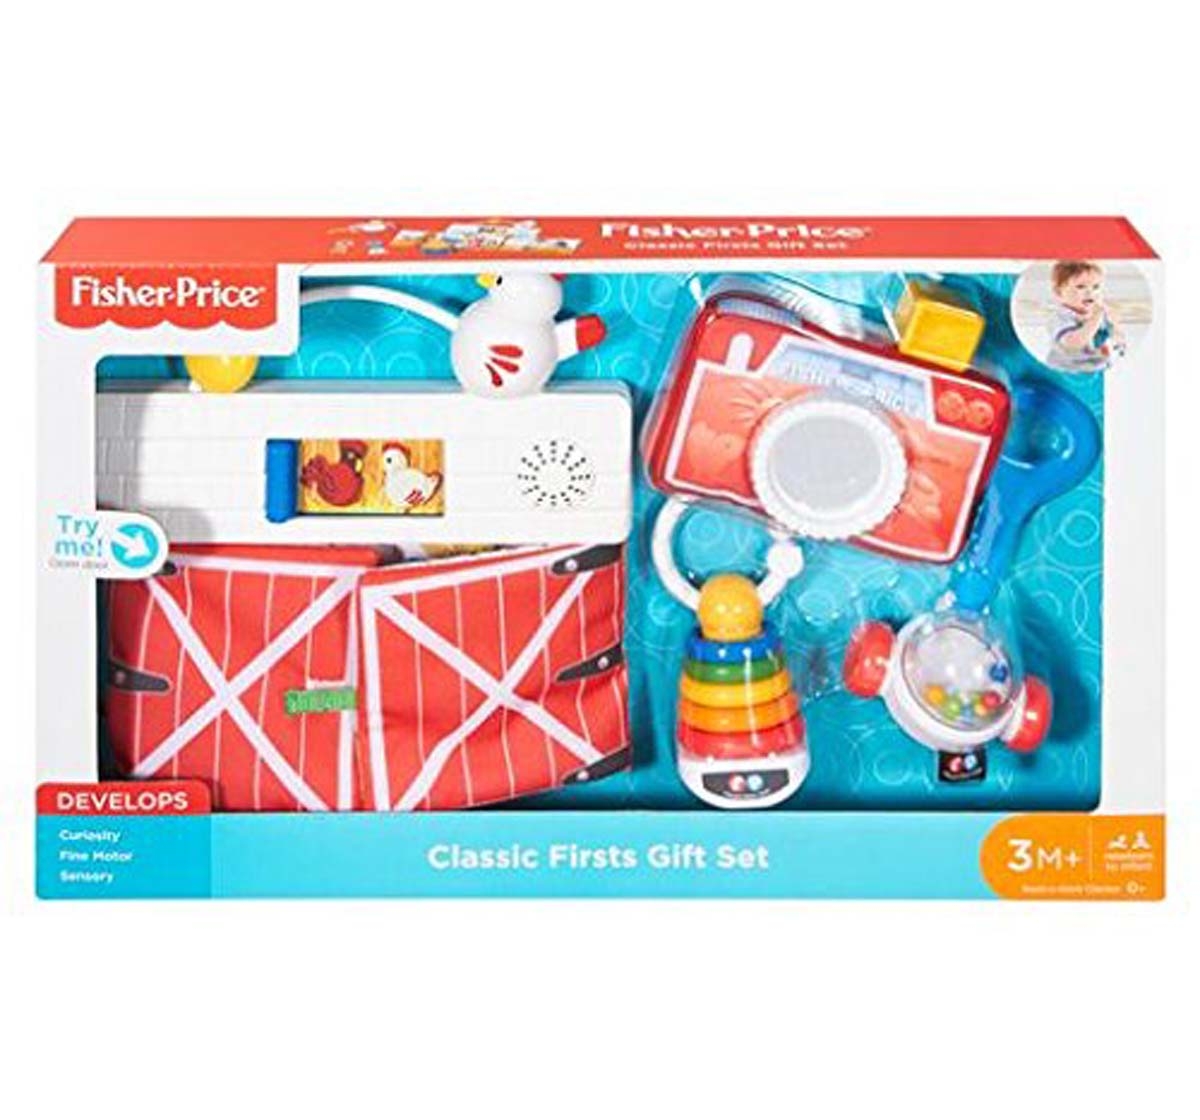 Fisher-Price | Fisher Price Mini Favorites Gift Set Learning Toys for Kids age 3M+ 0